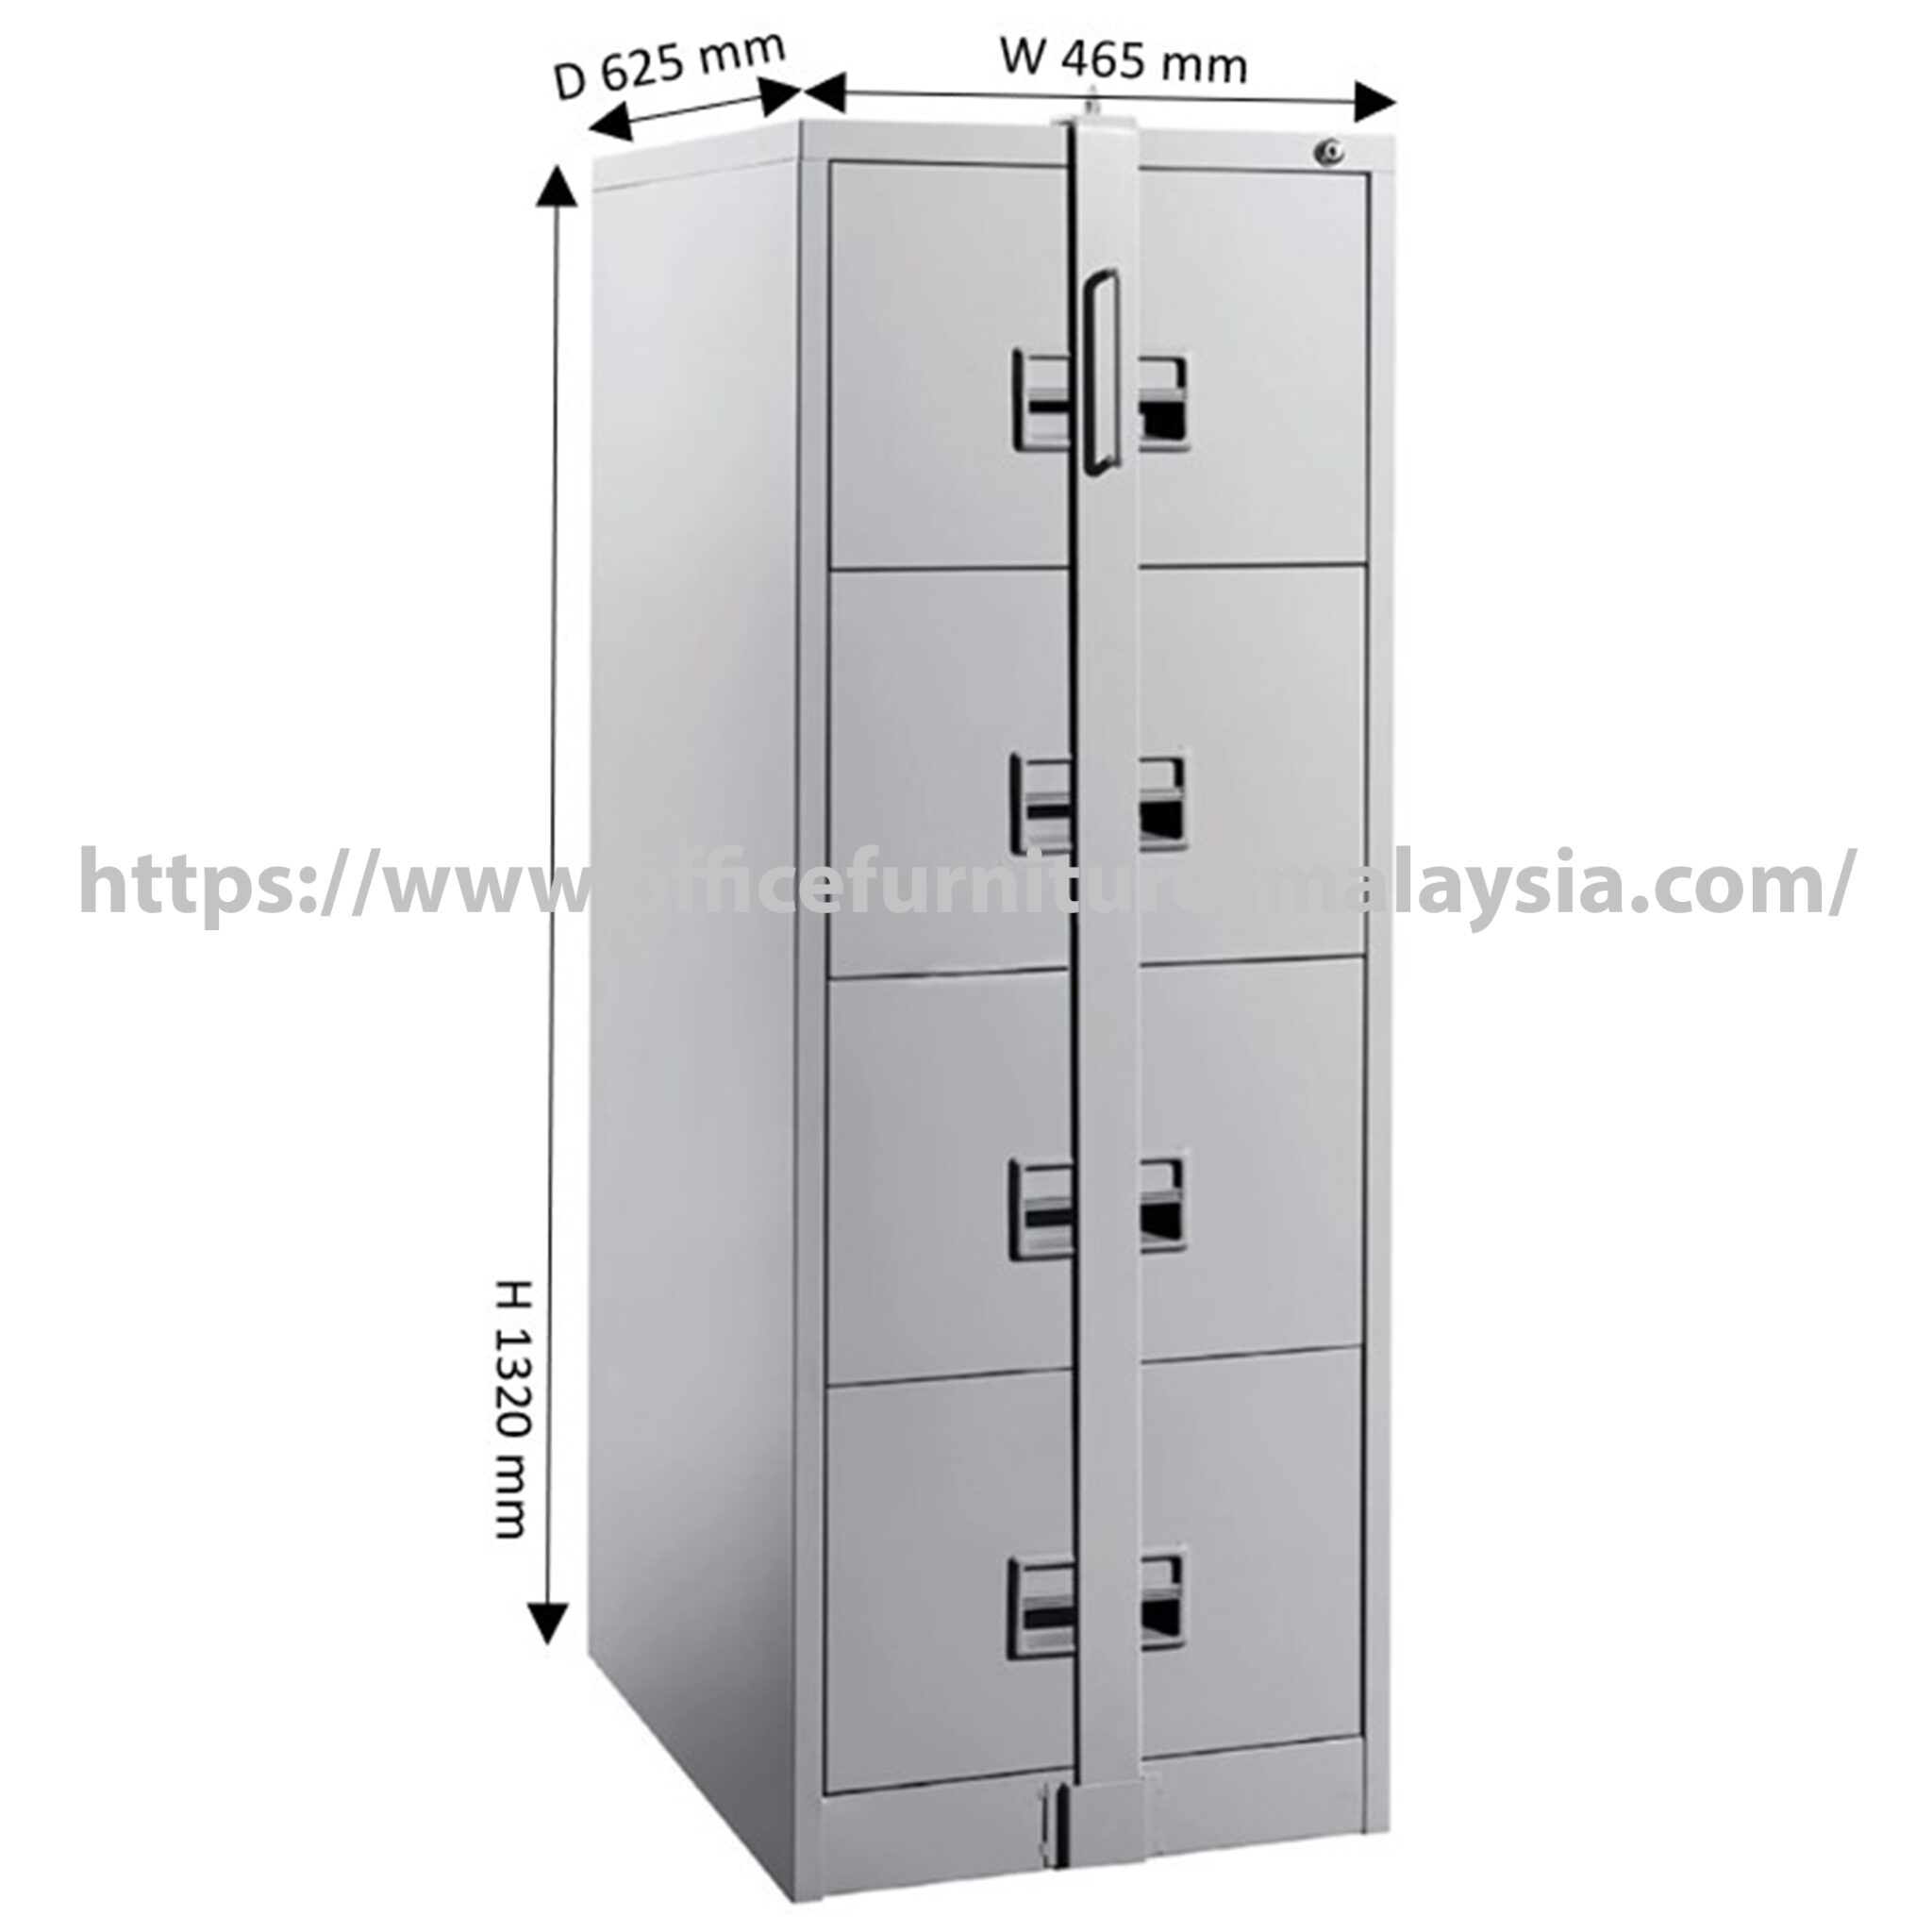 Very Heavy Duty Security Locking Bar For Verticle File Cabinets